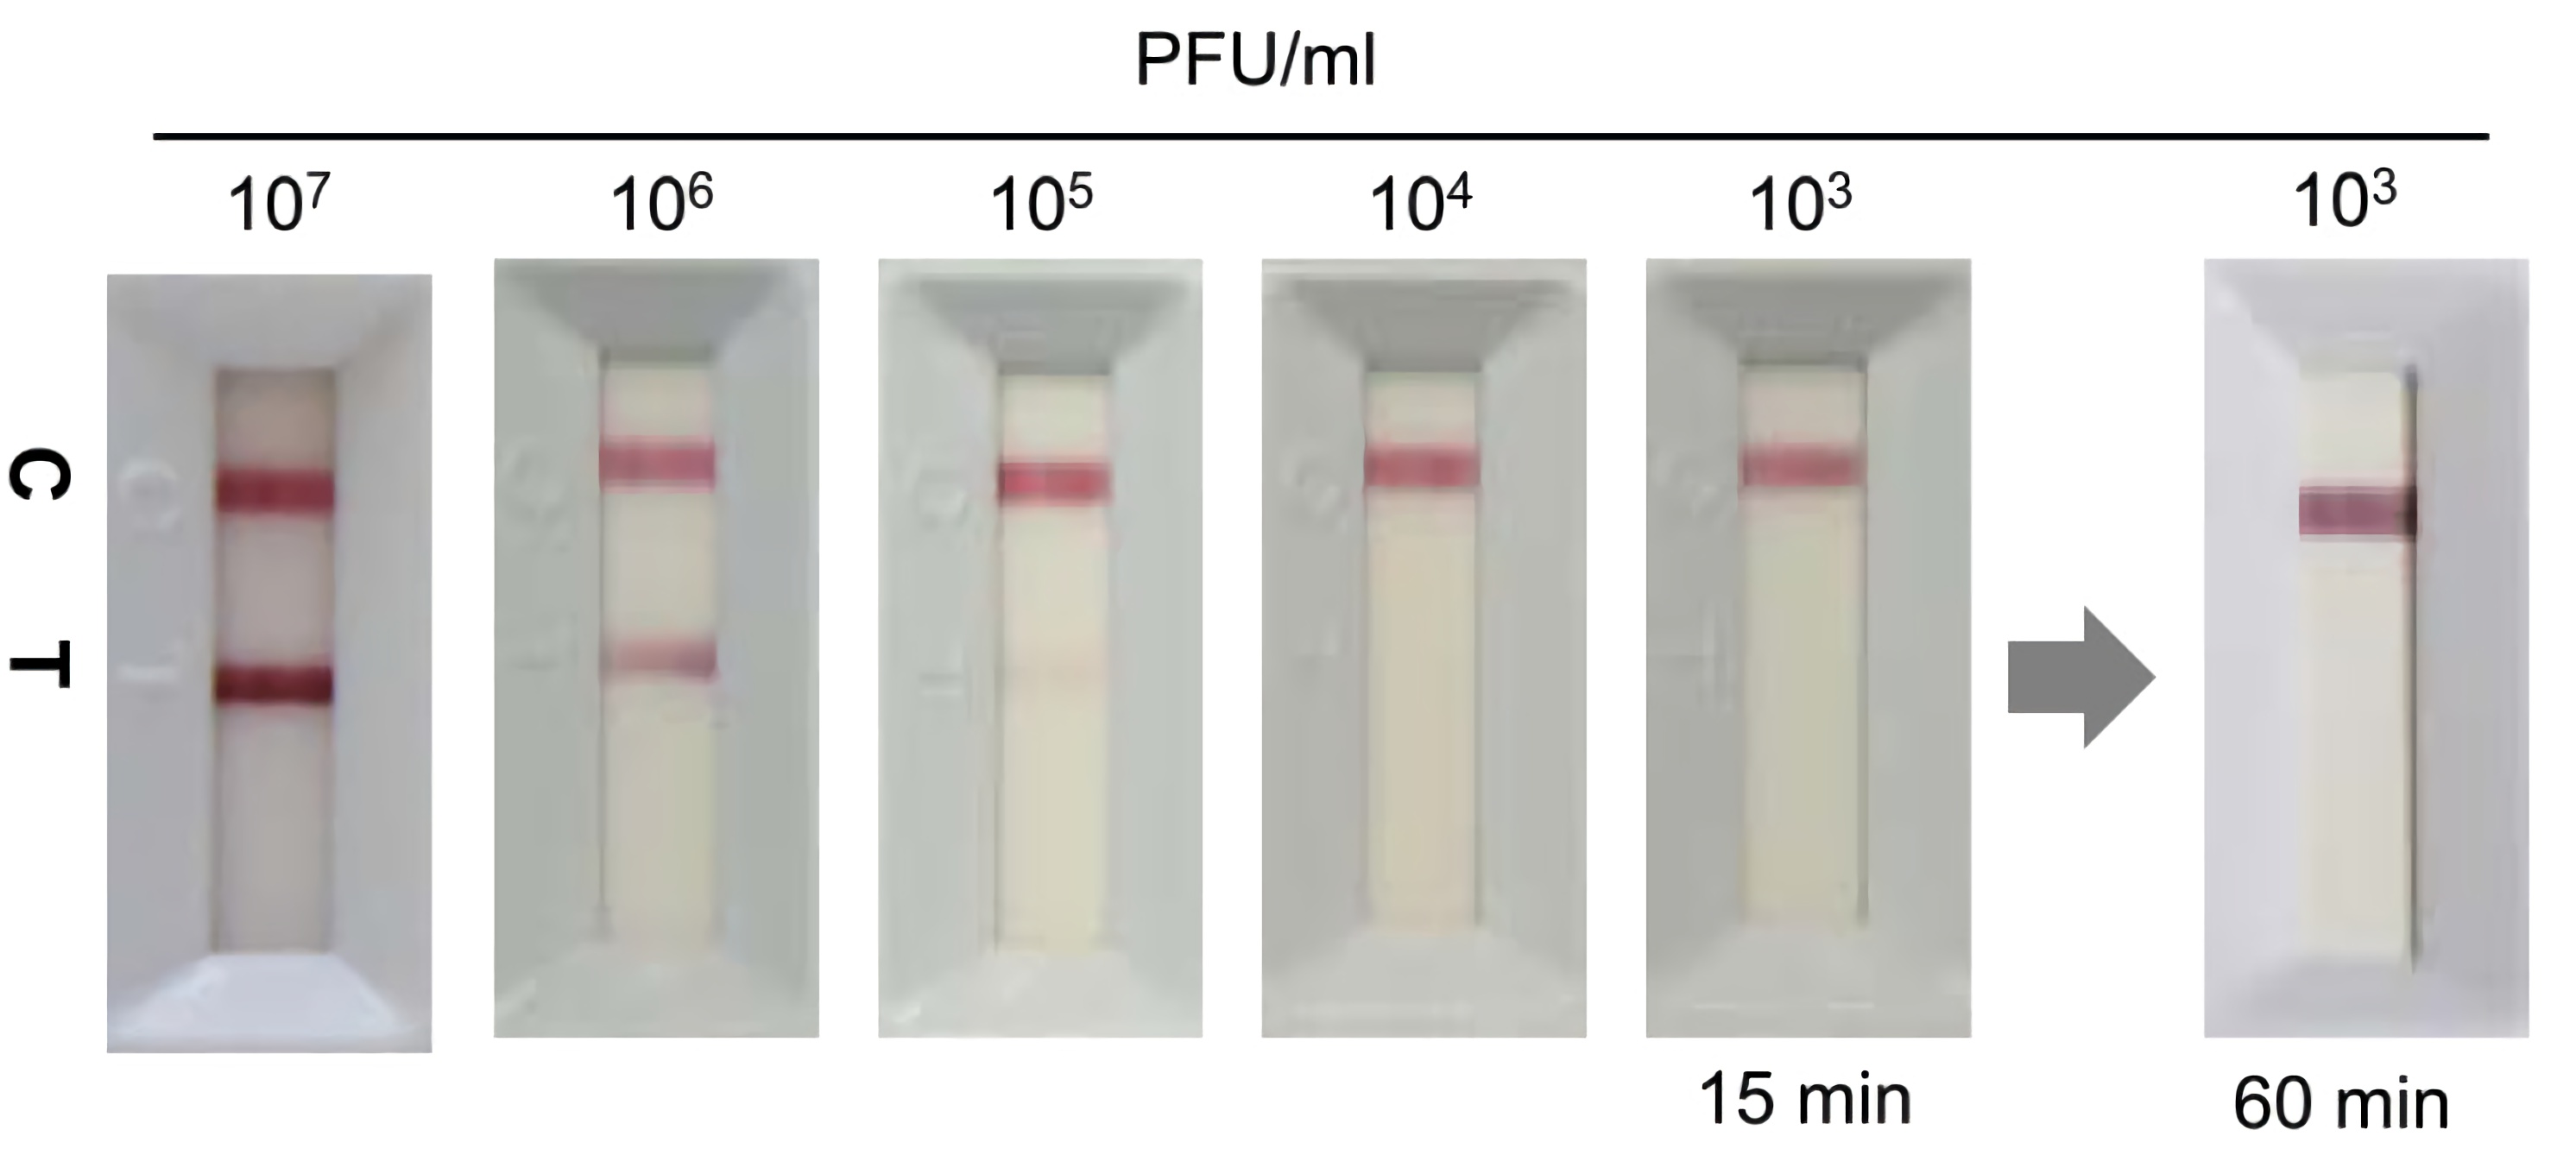 Representative profile of an IC test using serial 10-fold dilutions of the CHIKV Thai strain (ECSA genotype) culture supernatant.